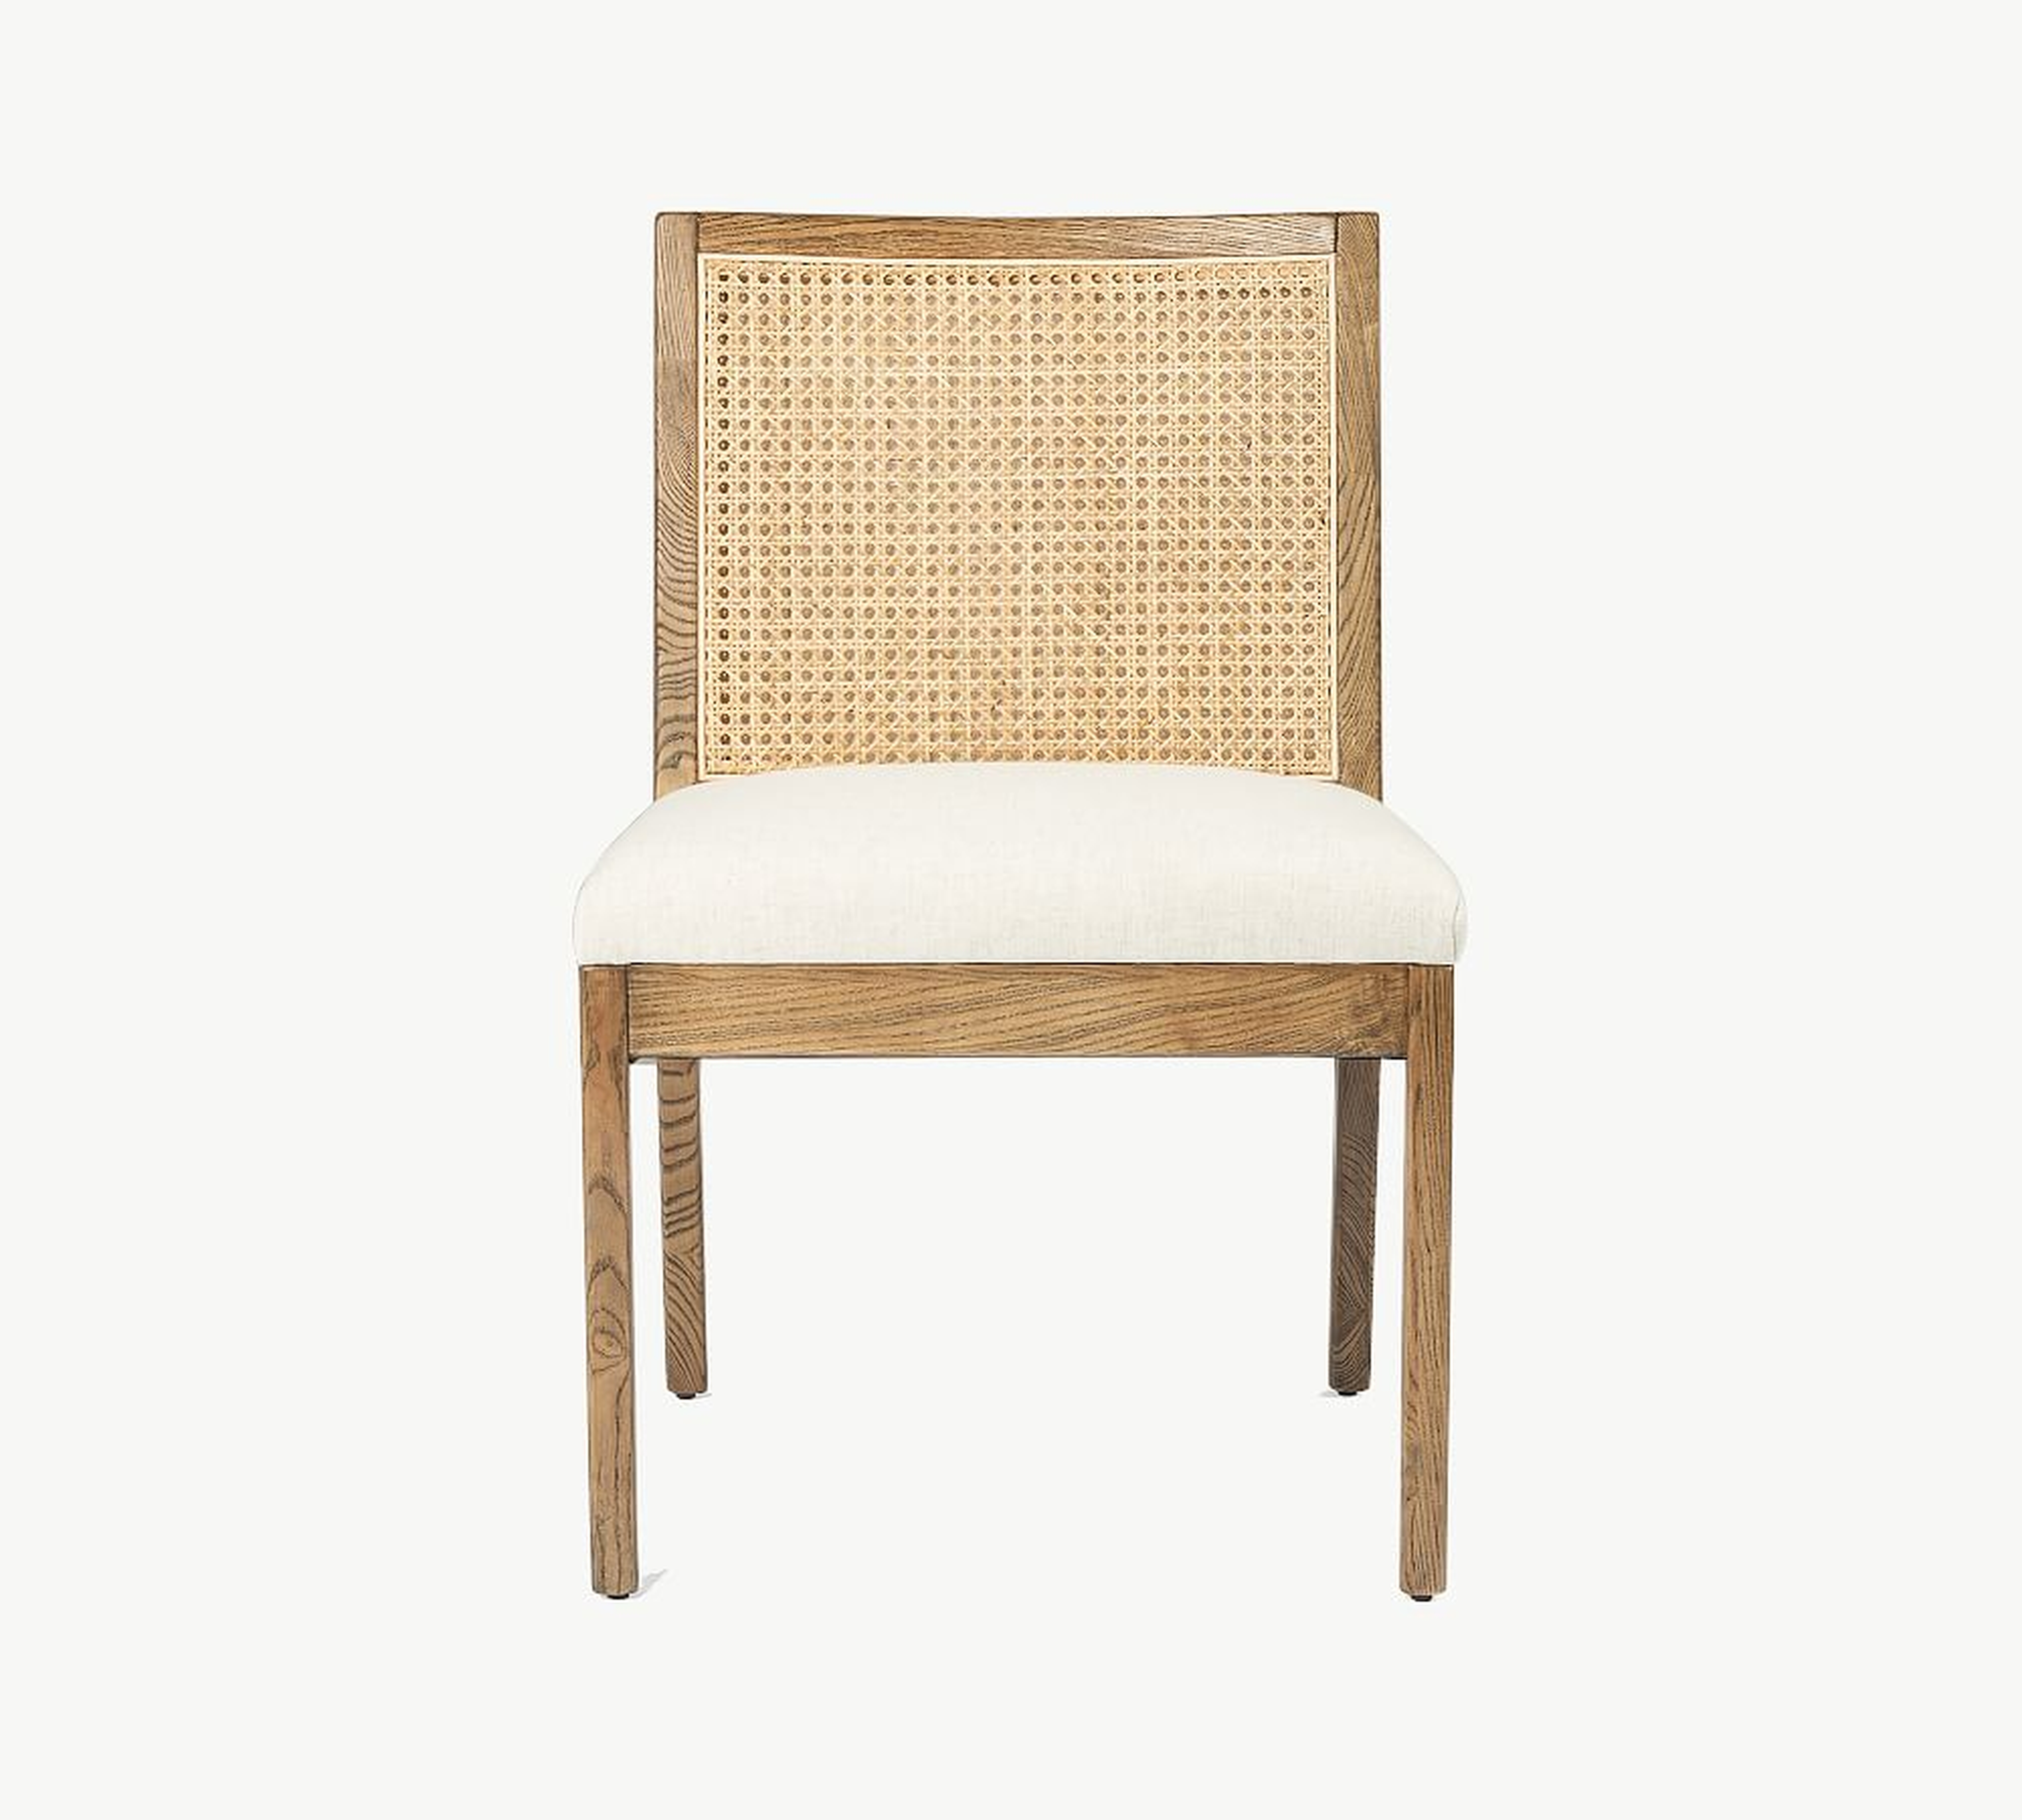 Lisbon Cane Dining Side Chair, Toasted Nettlewood - Pottery Barn